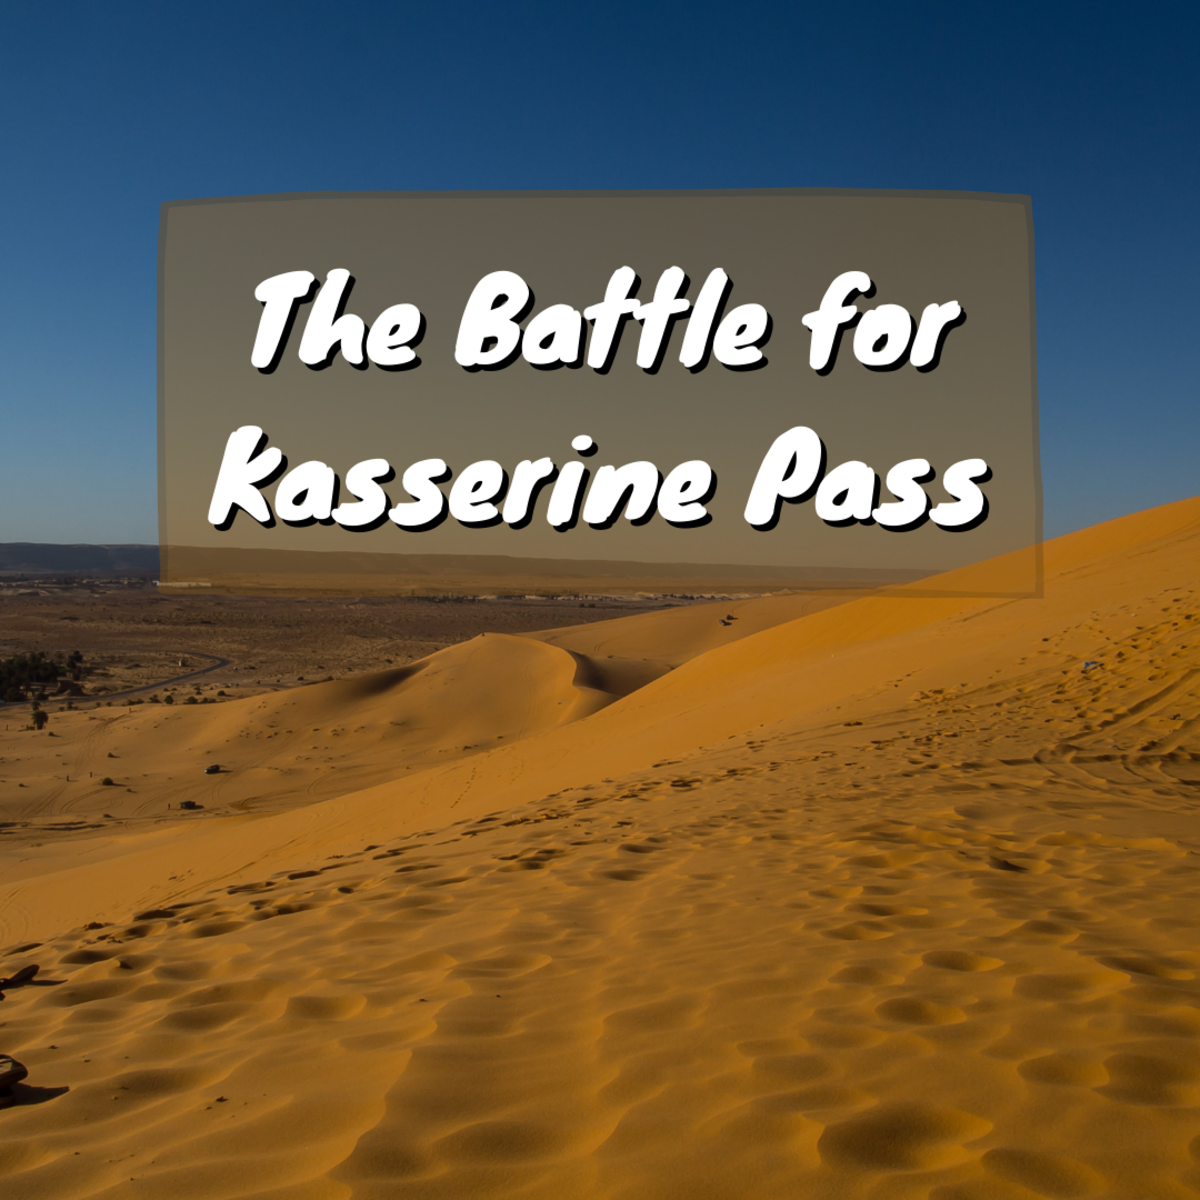 This article discusses German general Erwin Rommel's struggle to control North Africa in World War II, and the decisive Battle for Kasserine Pass fought in April 1943. This would be the United States' first major battlefield defeat during WWII.